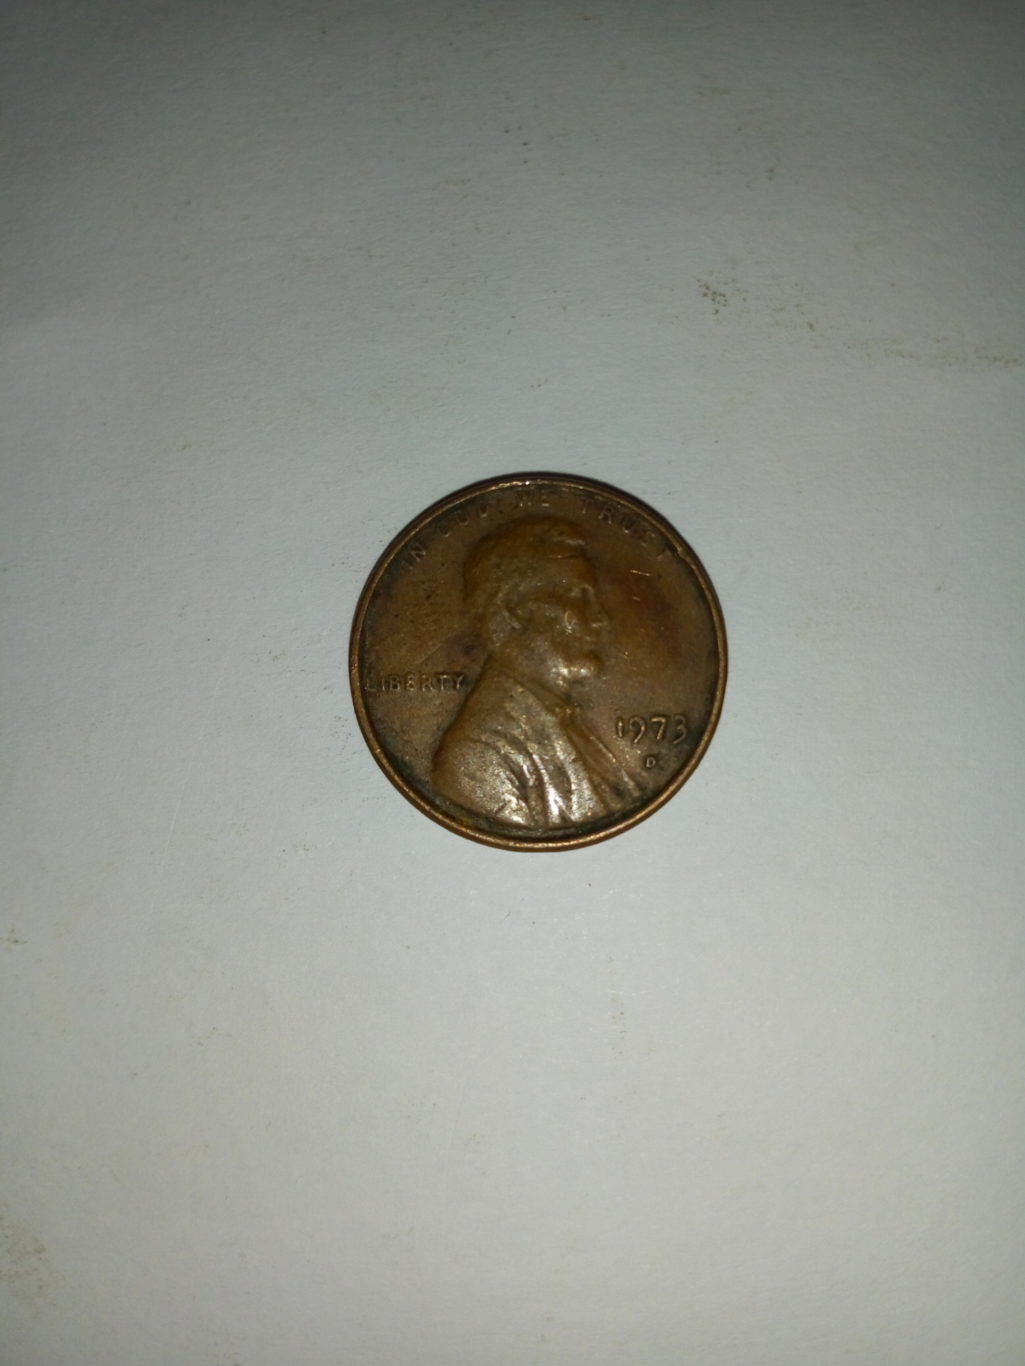 1973_united States of america 1 cent